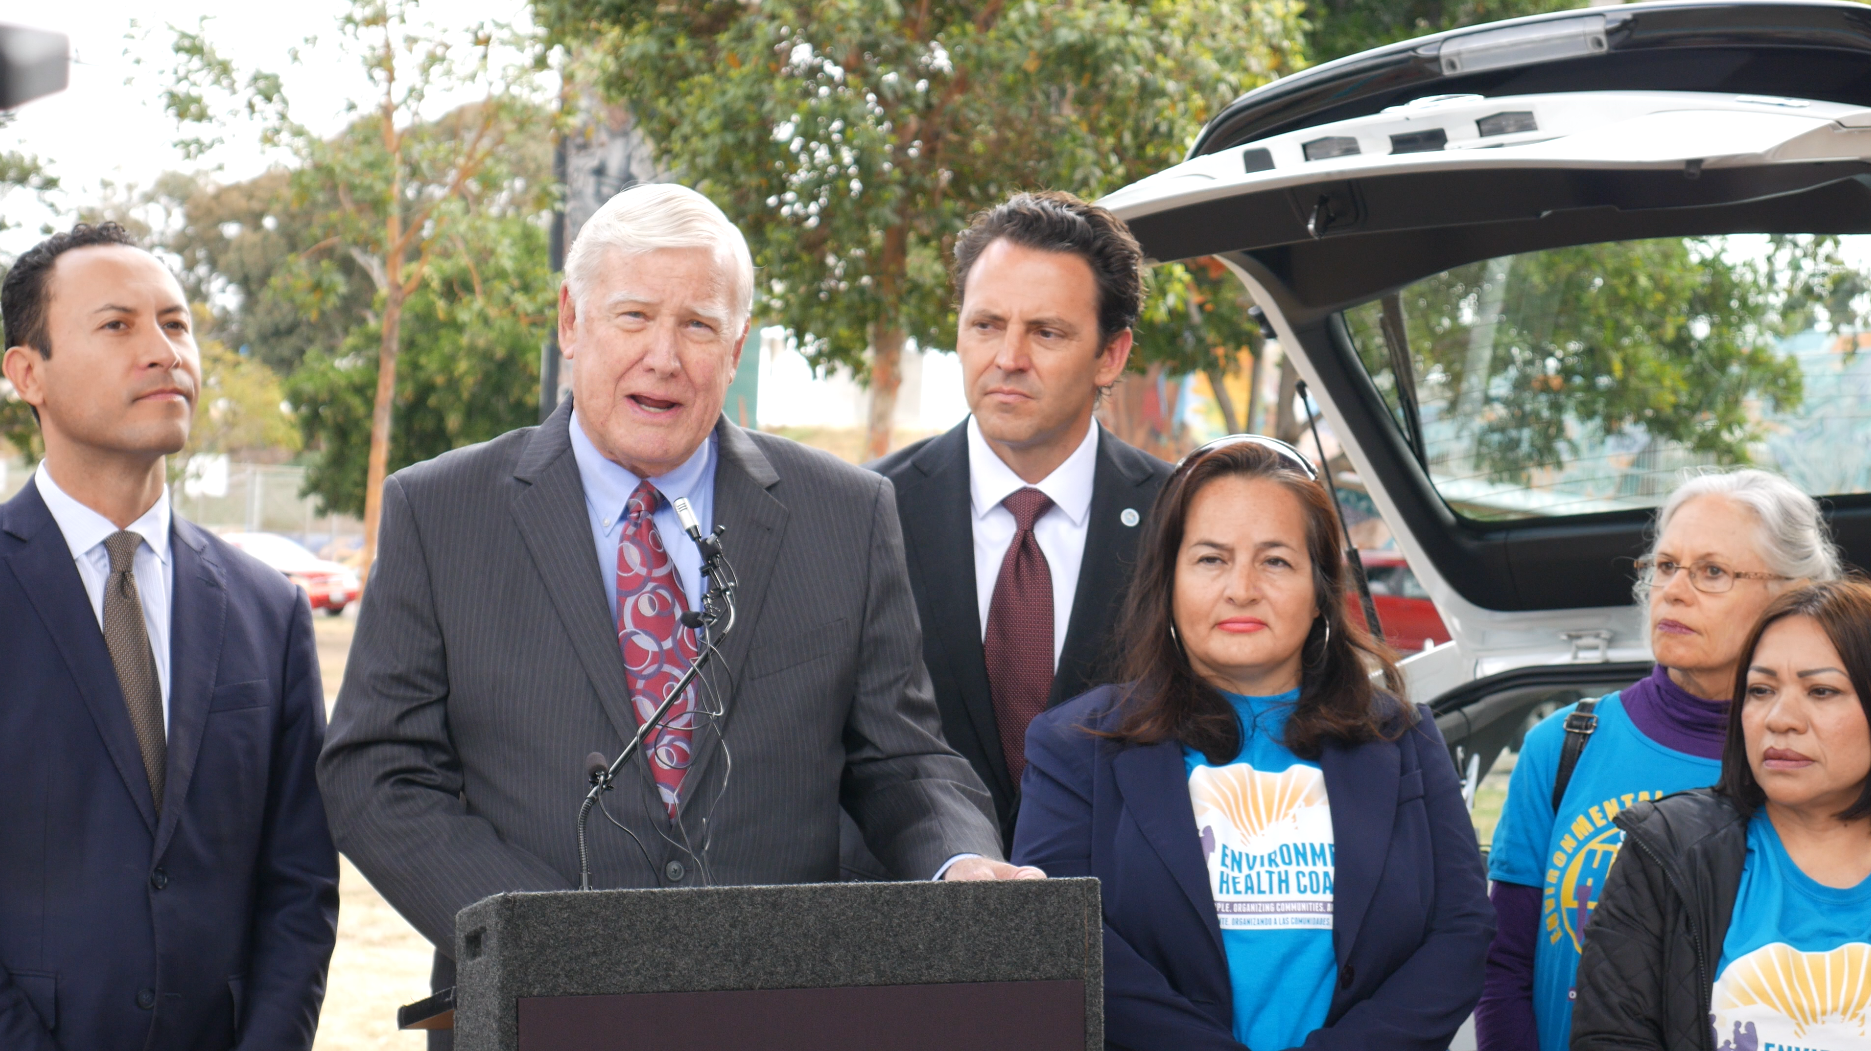 San Diego County Supervisor Greg Cox speaking at the press conference. Source: Aclima